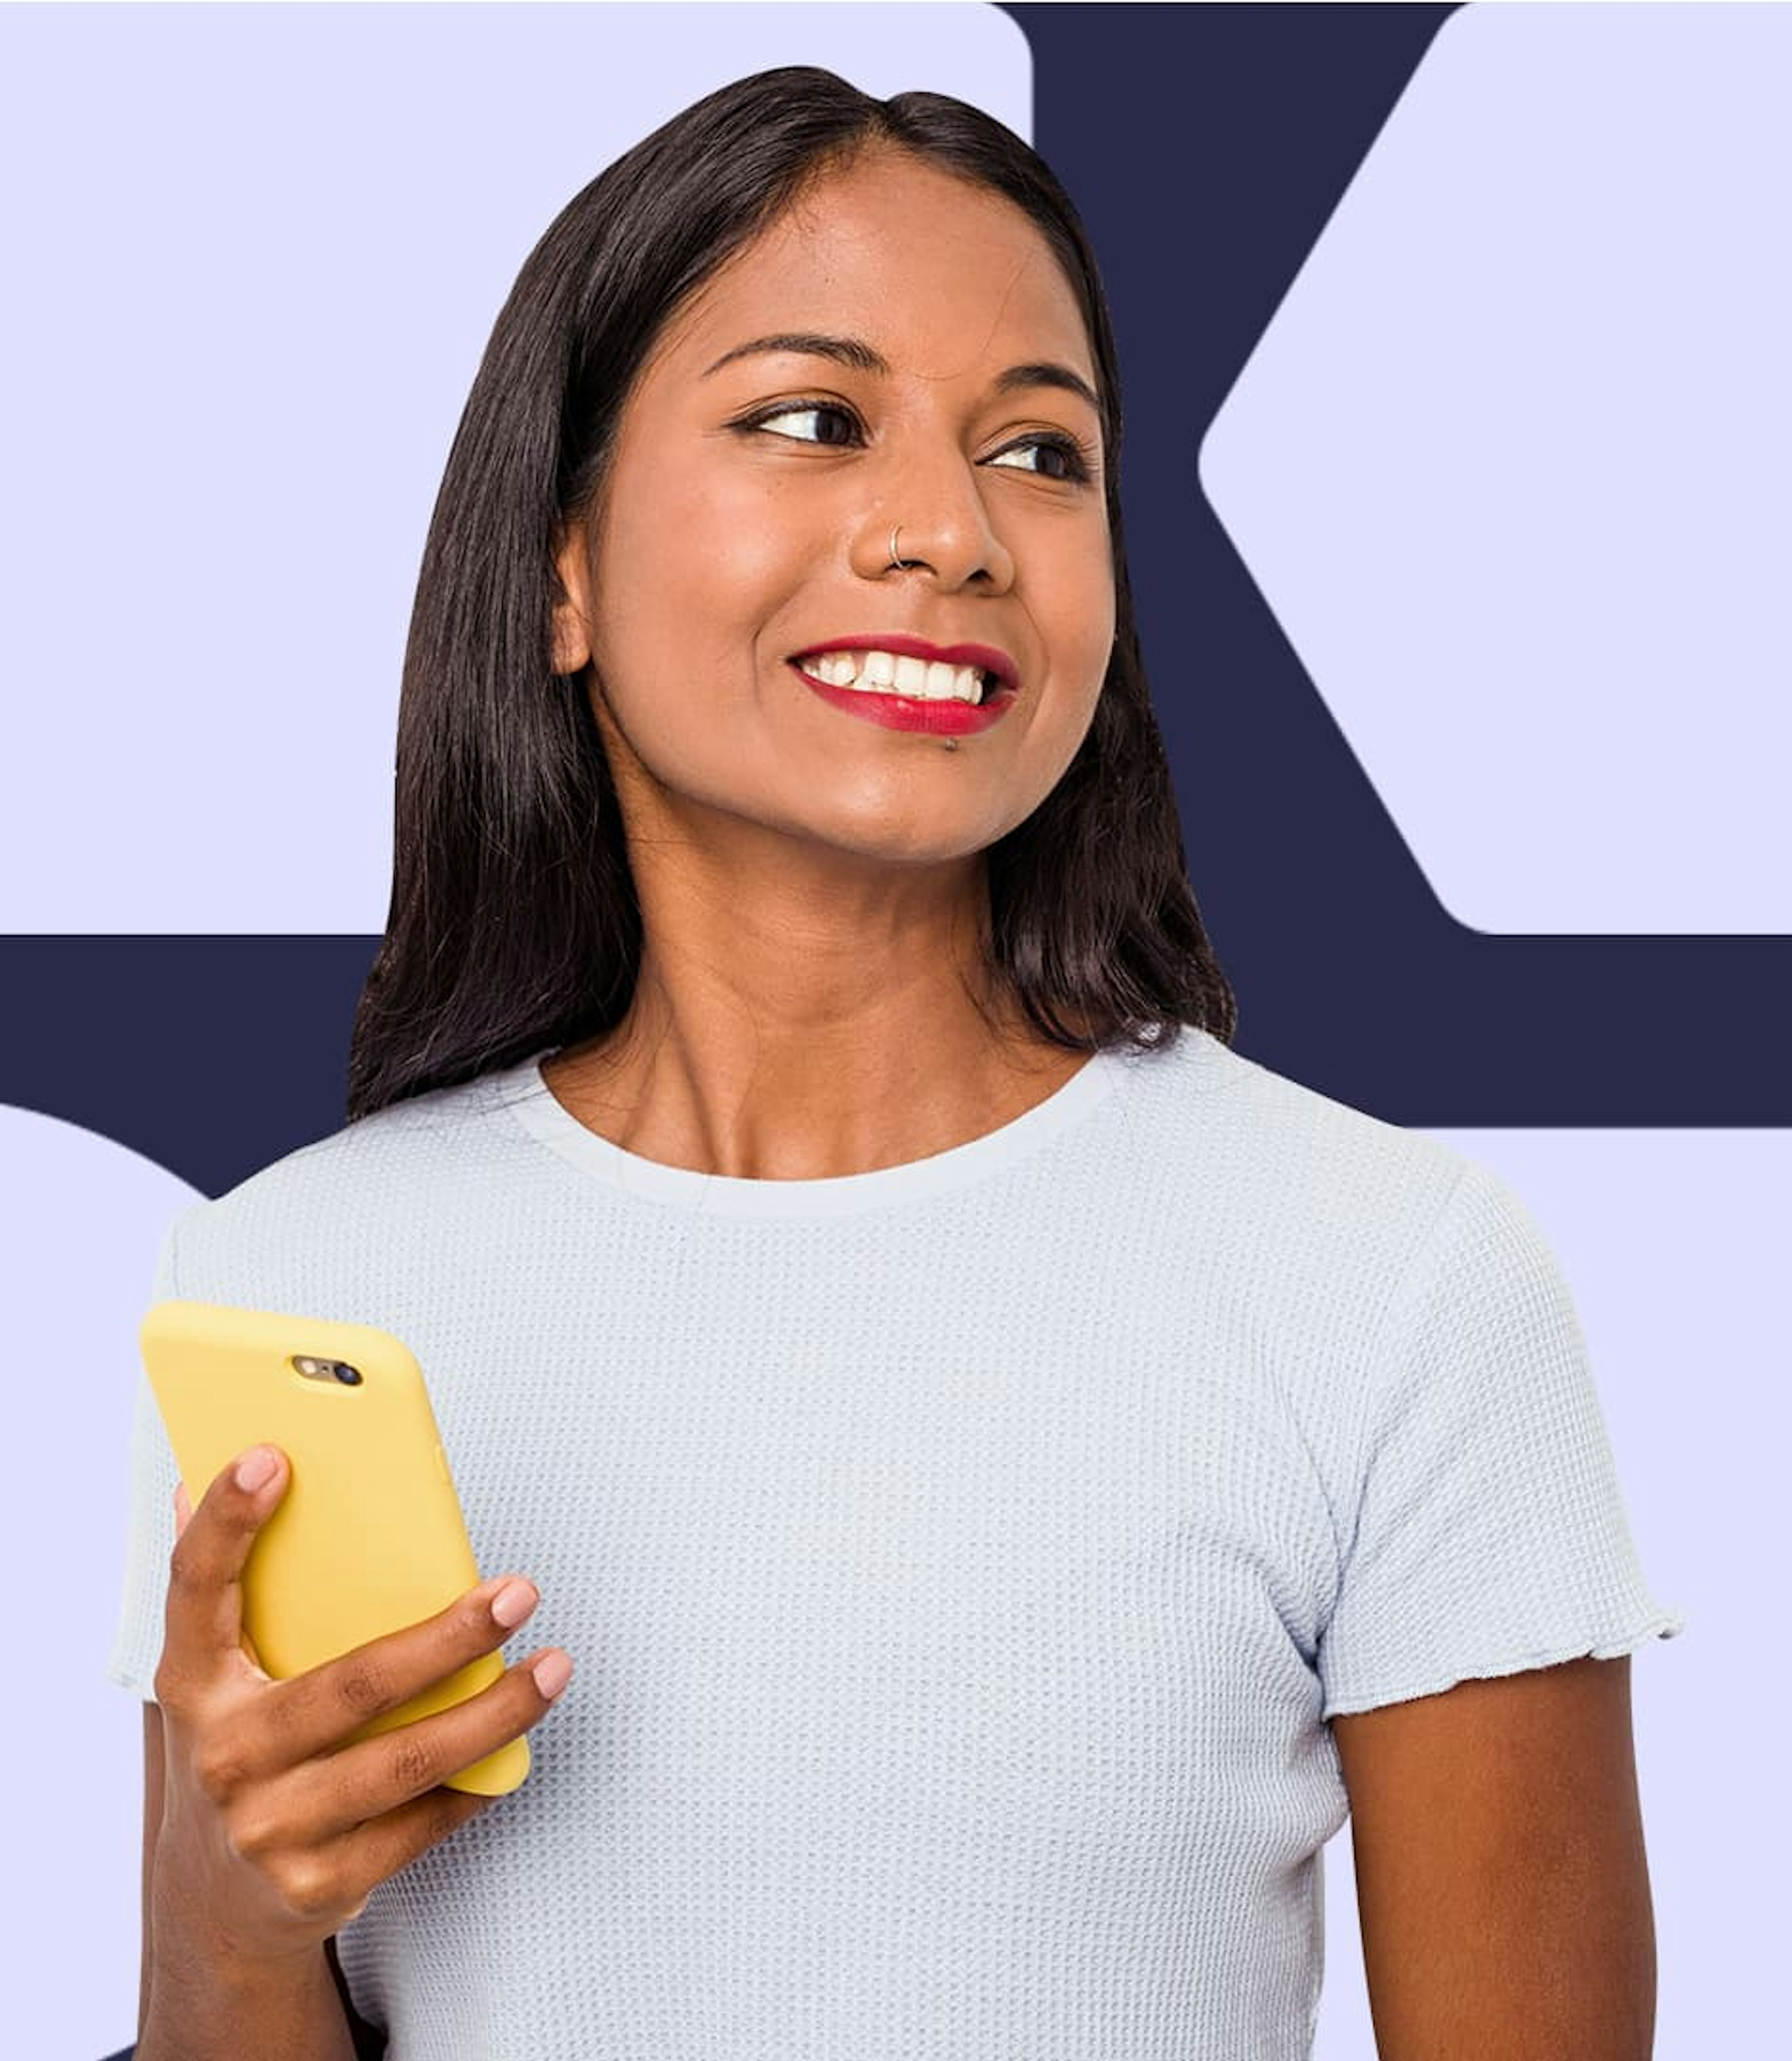 A woman in a white t-shirt is holding a yellow-cased cellphone and smiling off to the side.